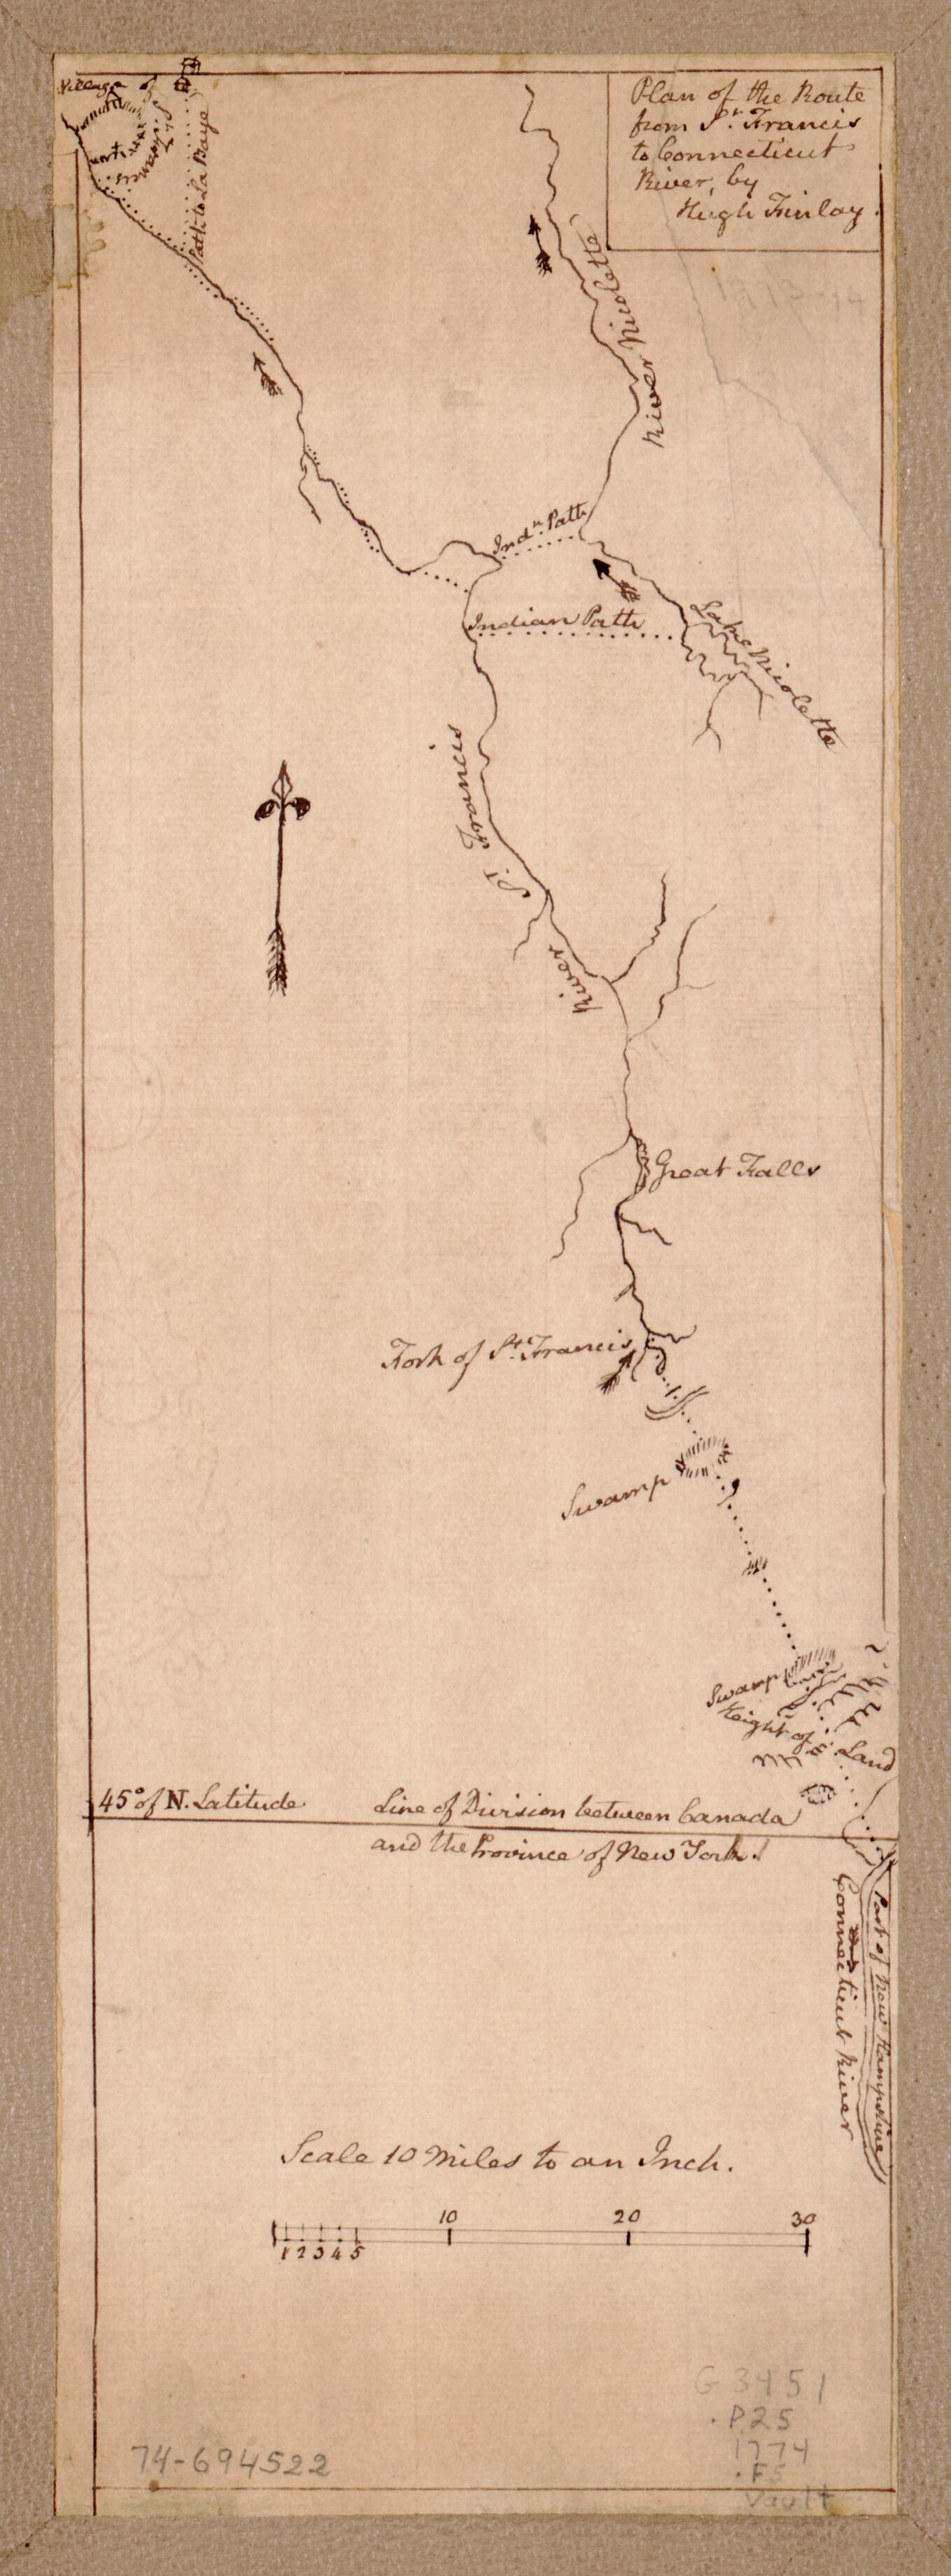 This old map of Plan of the Route from St. Francis to Connecticut River from 1774 was created by Hugh Finlay in 1774